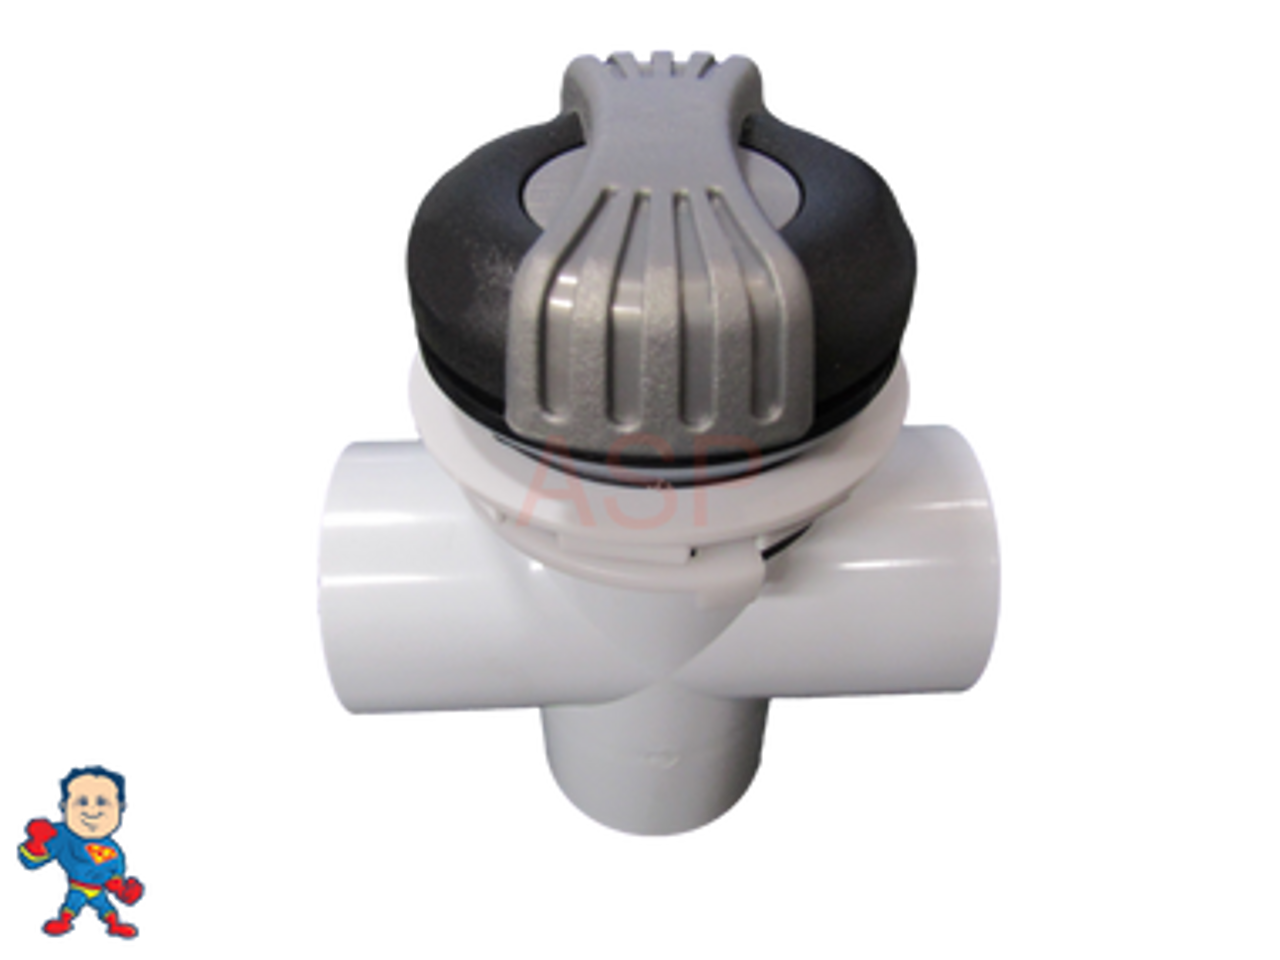 Hoss Modern Complete Diverter Valve Glue Kit 3 3/4" Wide Cap Gray Hot Tub Spa 2" How To Video
This valve accepts 2" pipe or fittings which would measure about 2 3/8" outside Diameter of the pipe and 2 3/8" inside Diameter of the Valve..